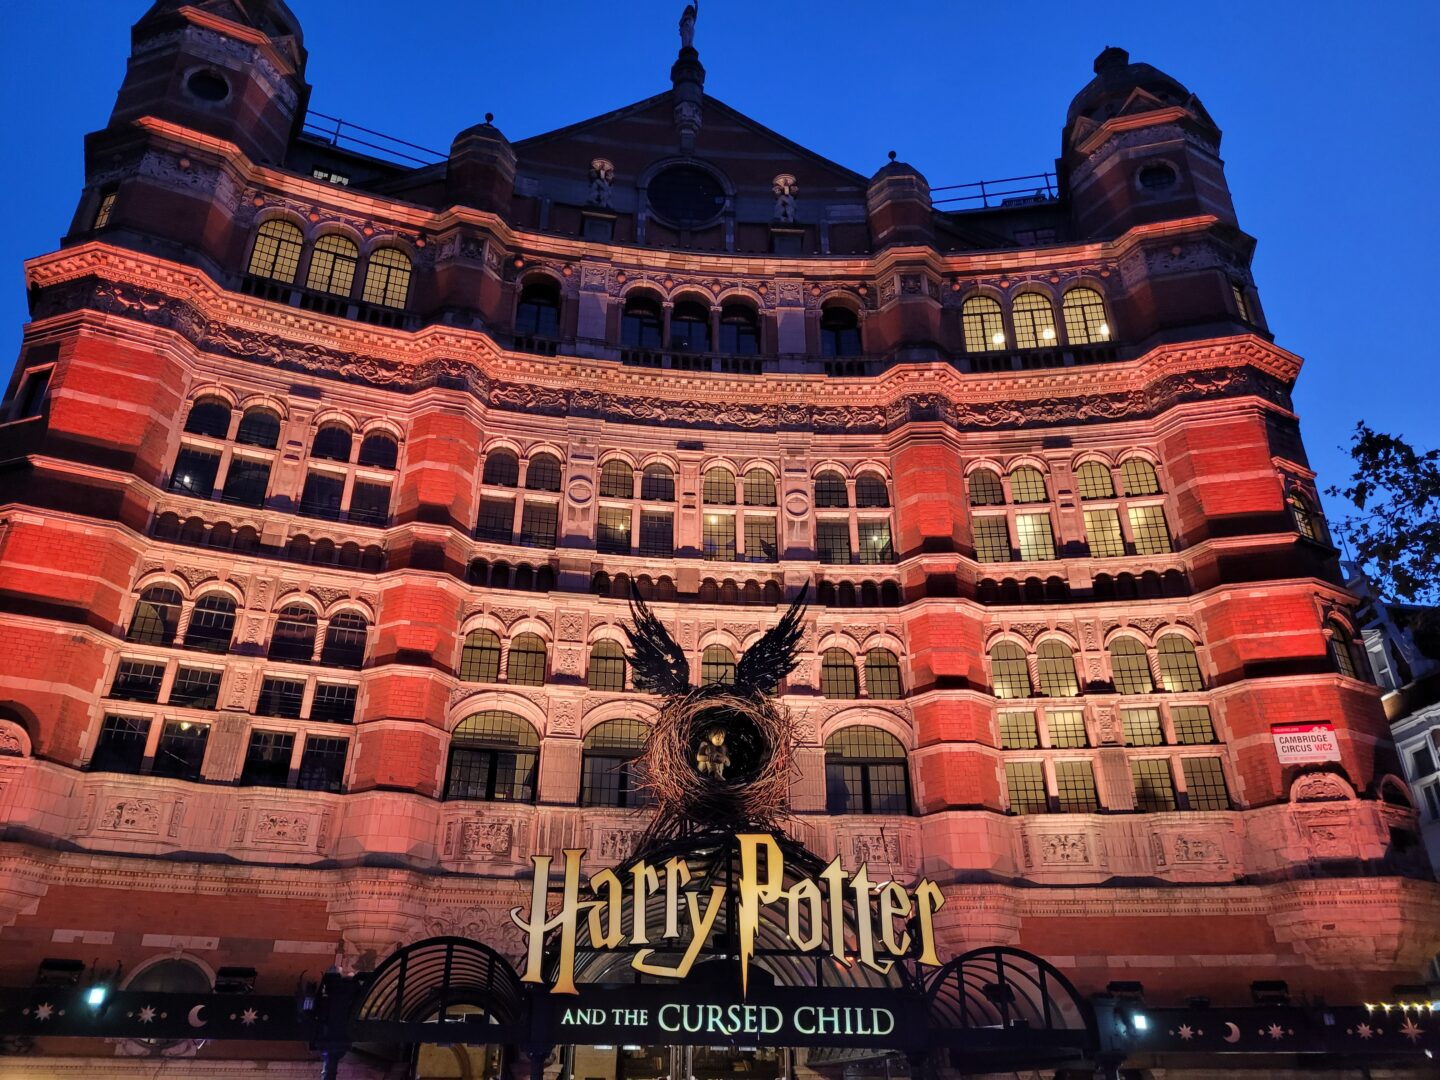 Harry Potter and The Cursed Child Palace Theatre Londen